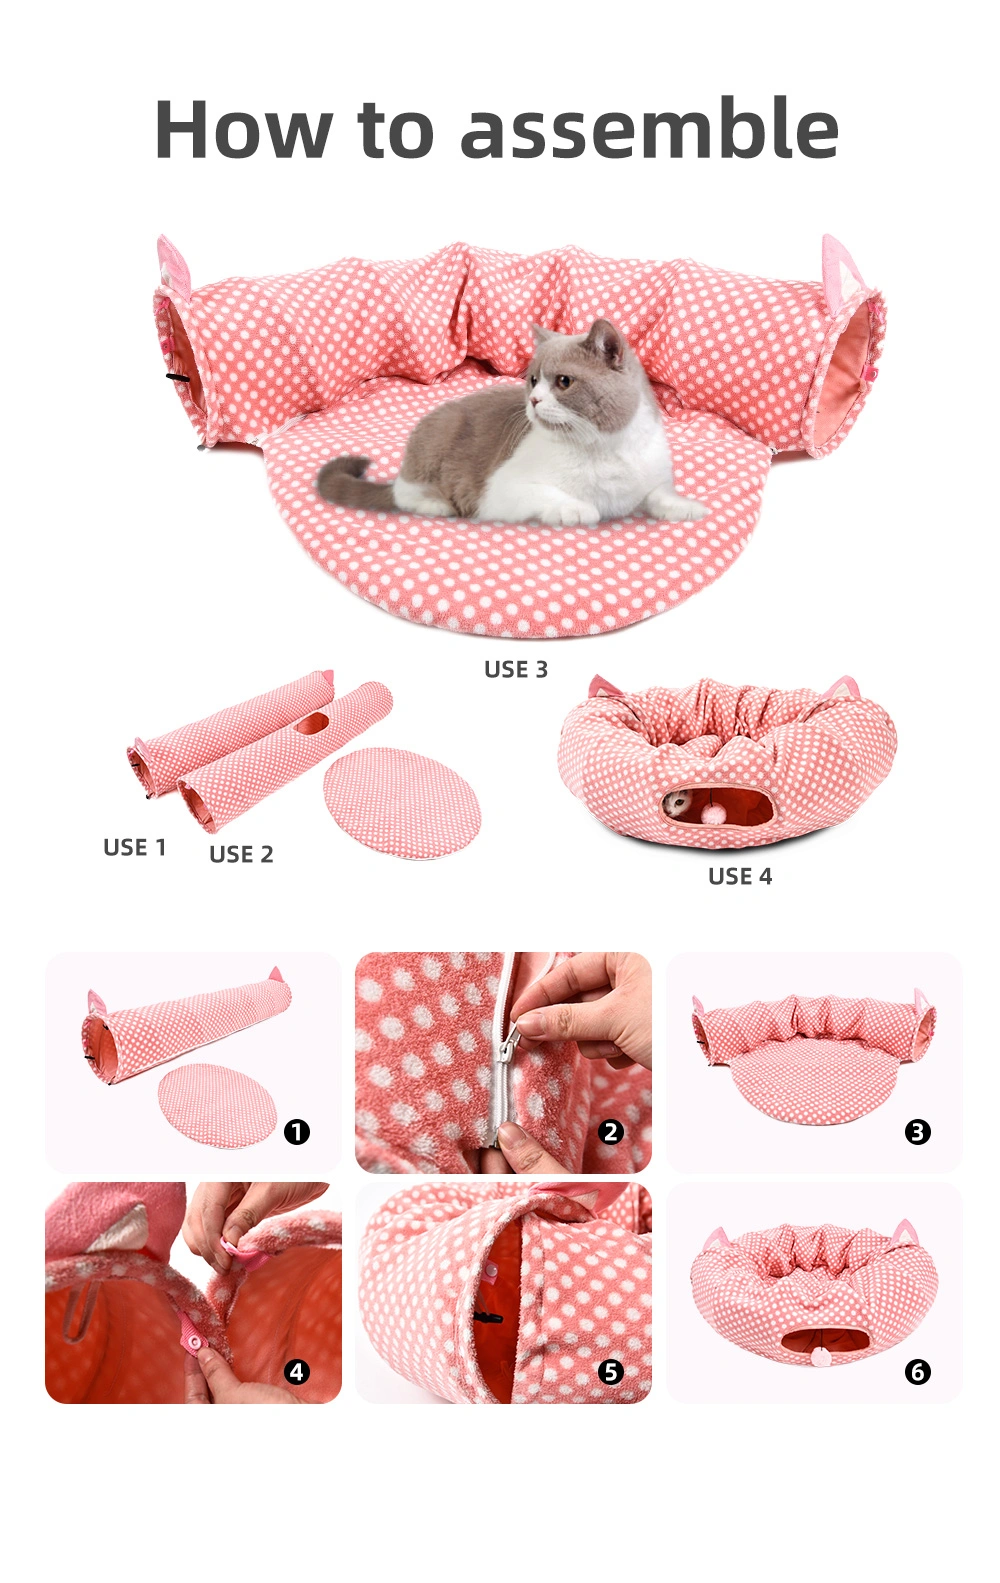 4 in 1 Pink DOT Sweet Style Pet Kitty Bed Detachable Foldable Cat Tunnel Bed